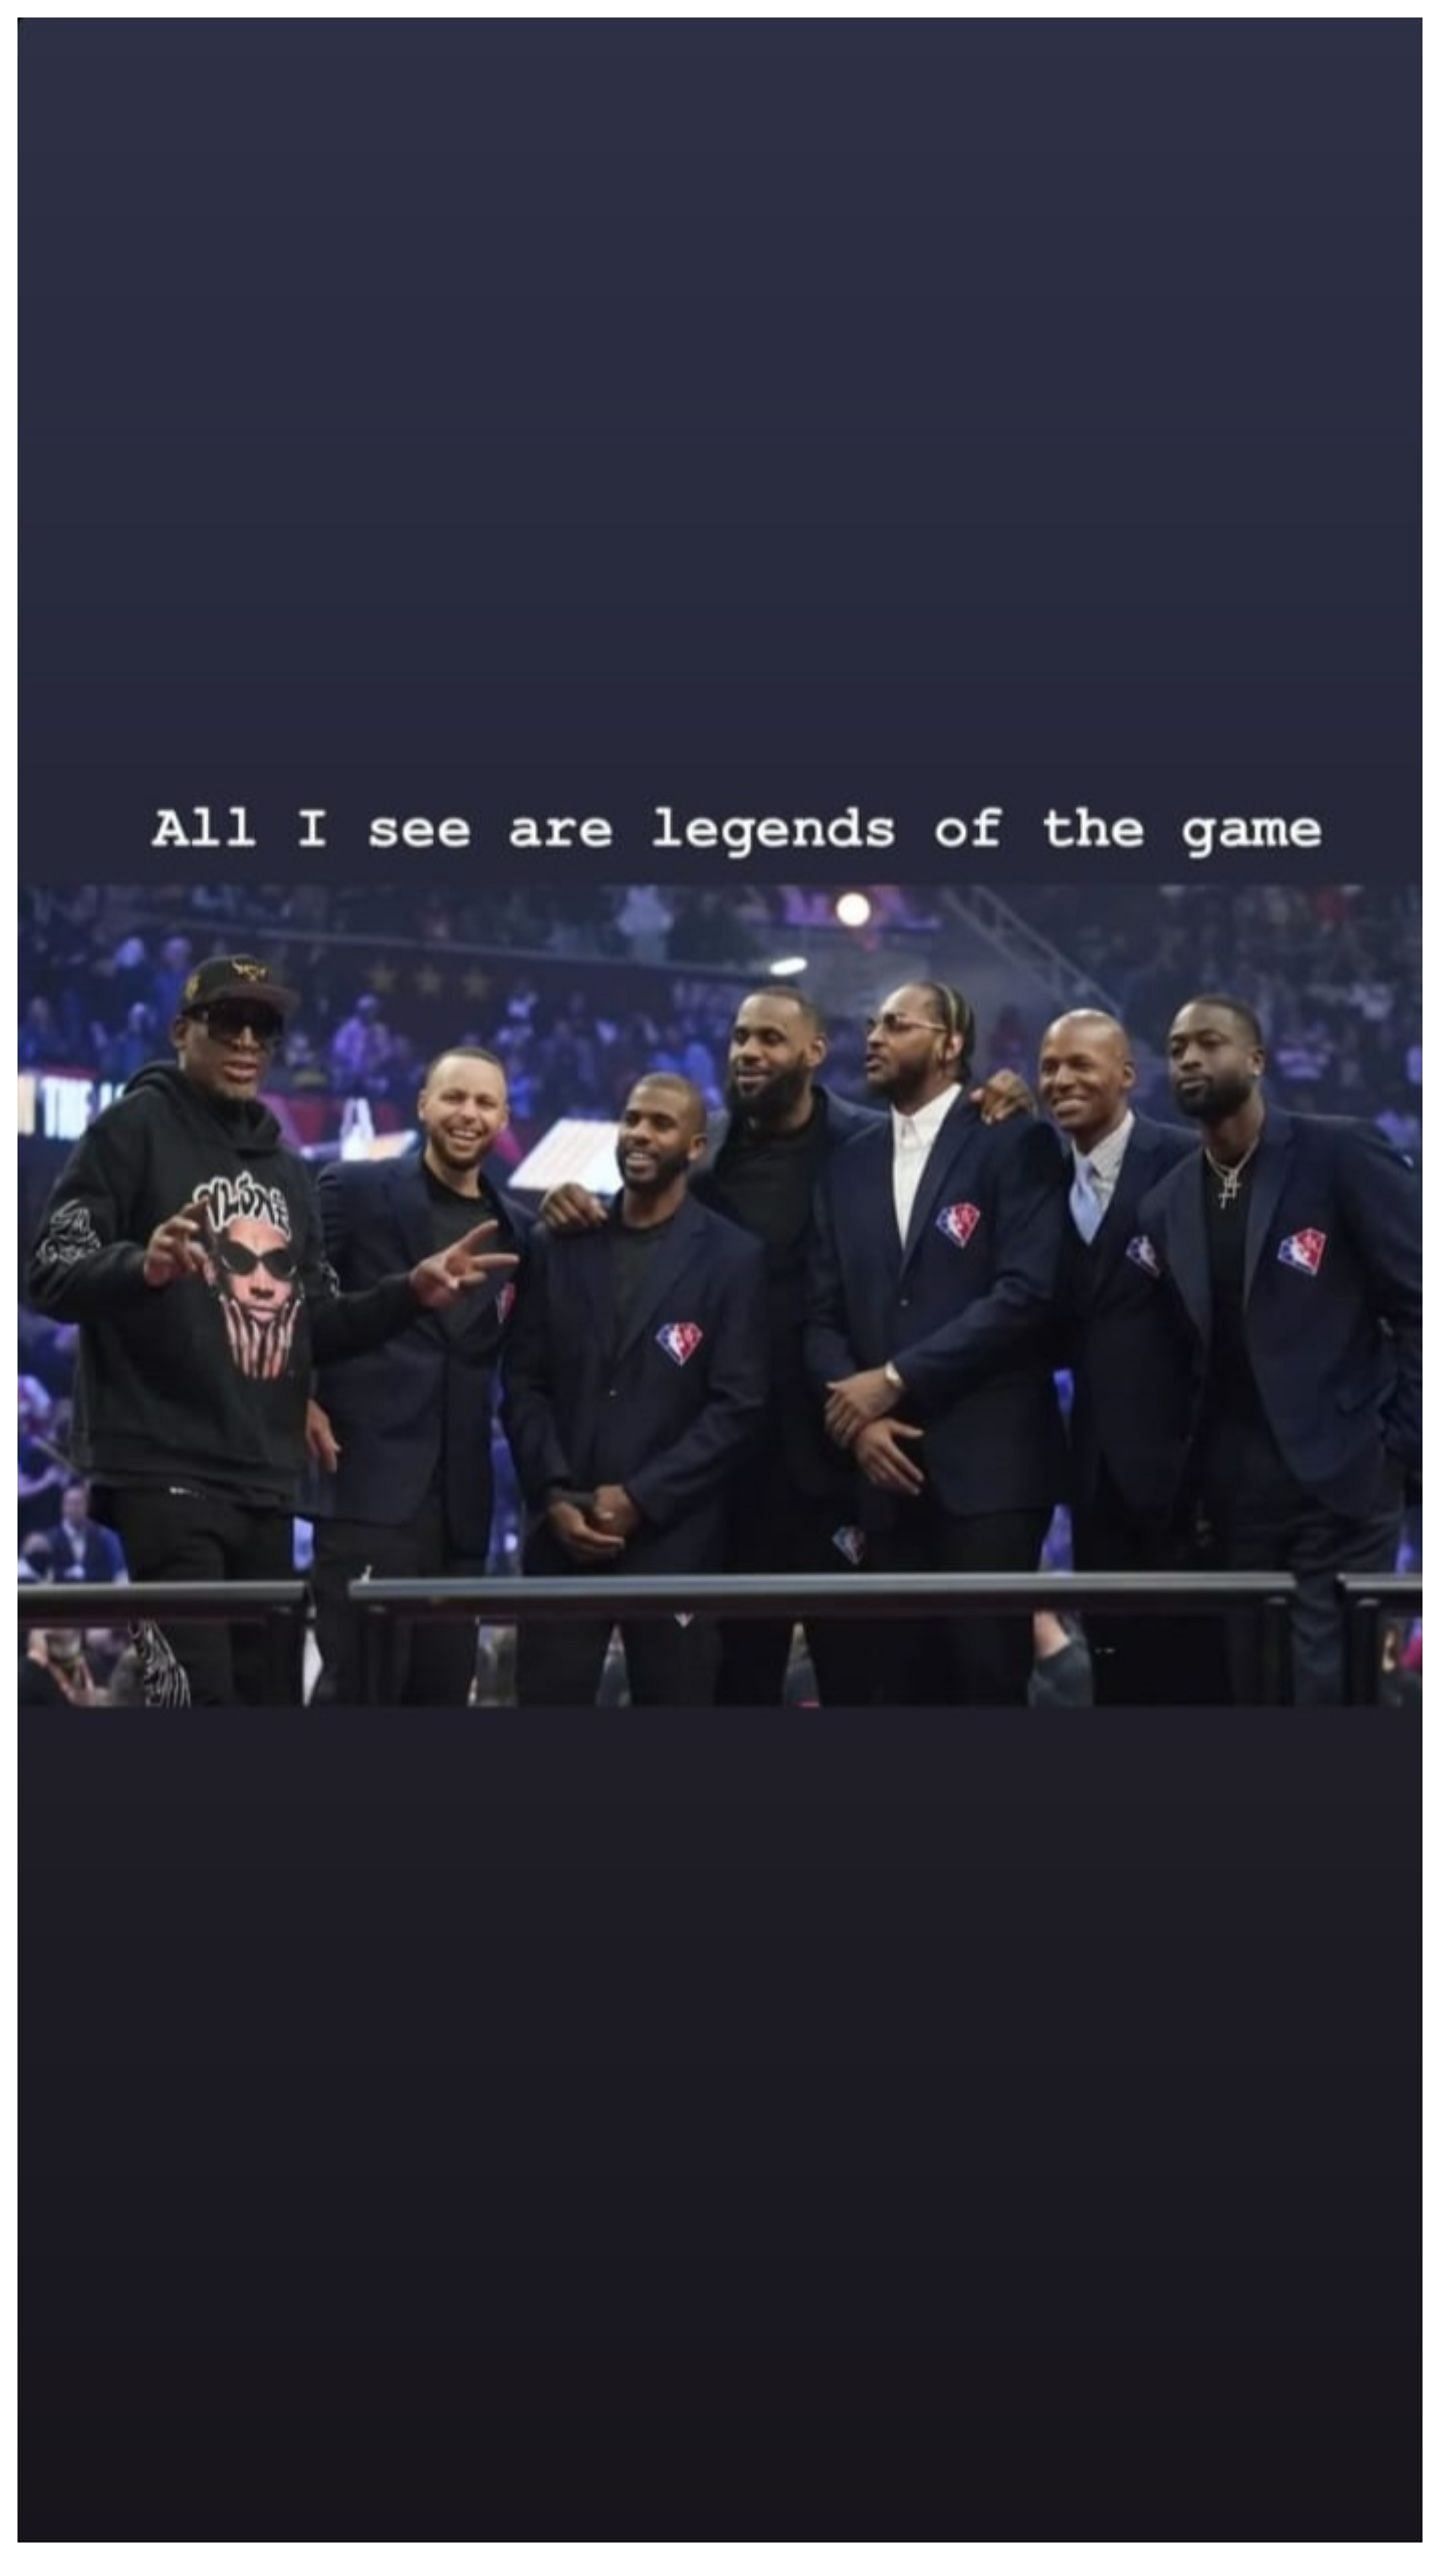 Dwyane Wade shared this on his Instagram stories.